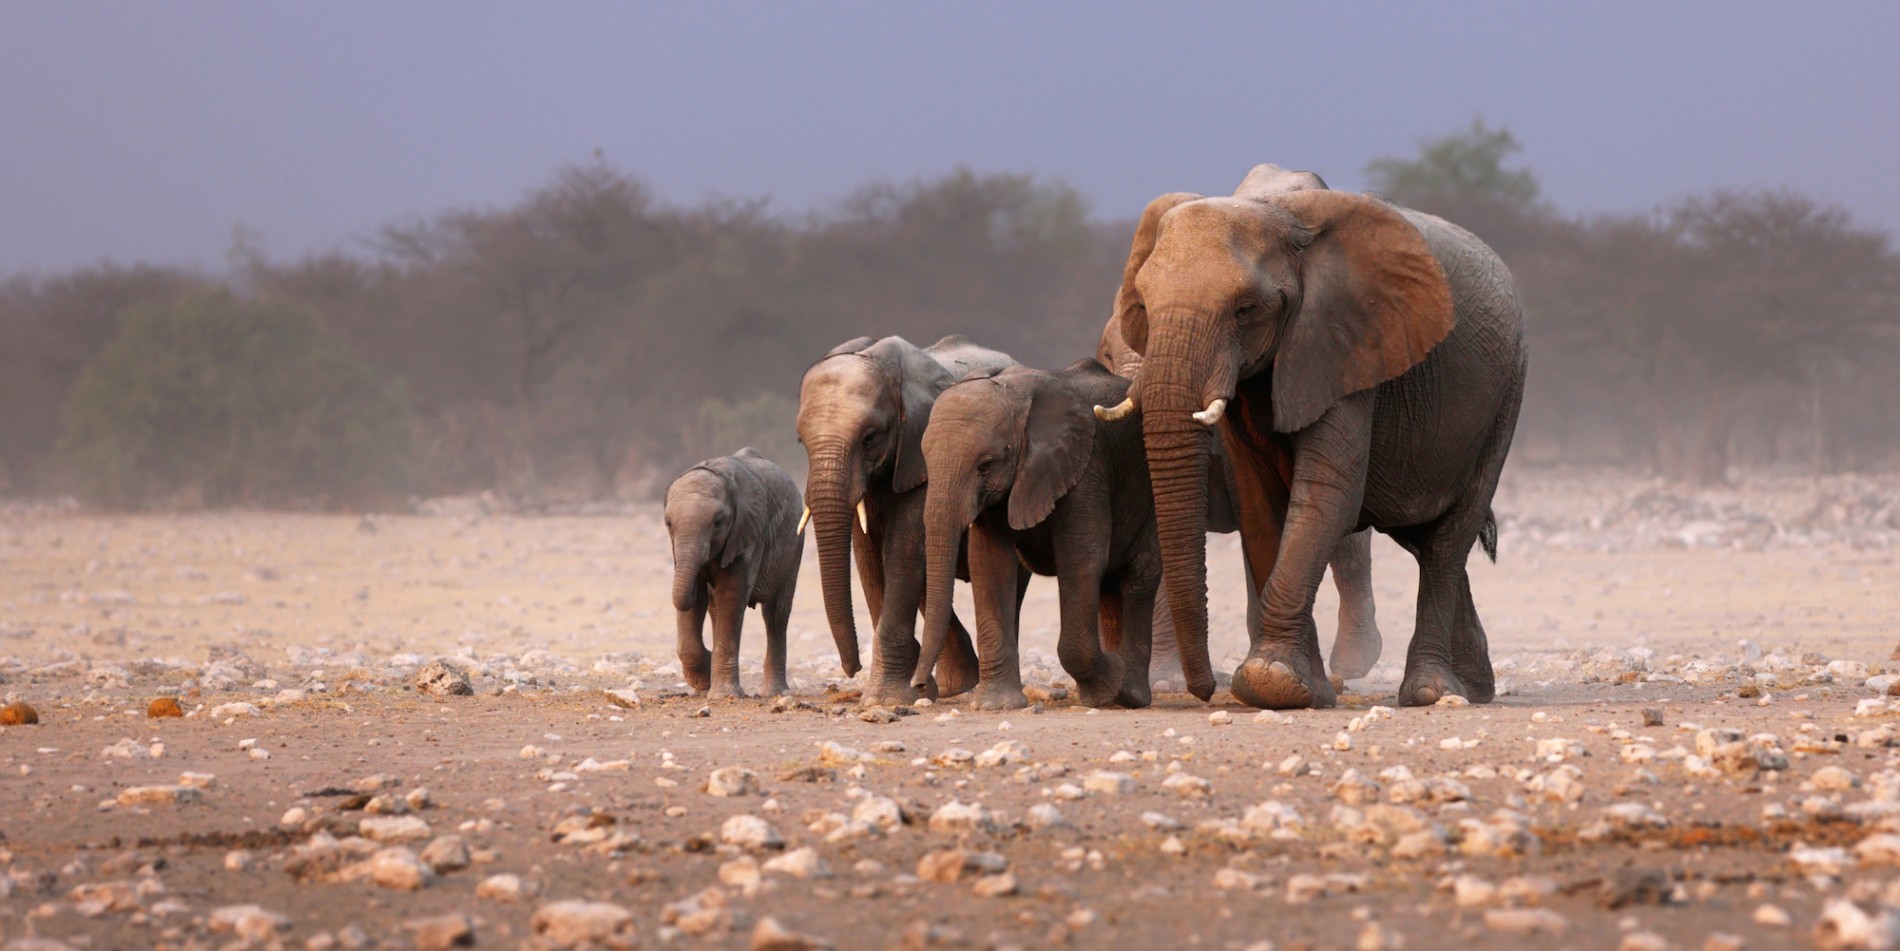 A group of African elephants of all different sizes and ages walking through sand filled with rocks in Namibia